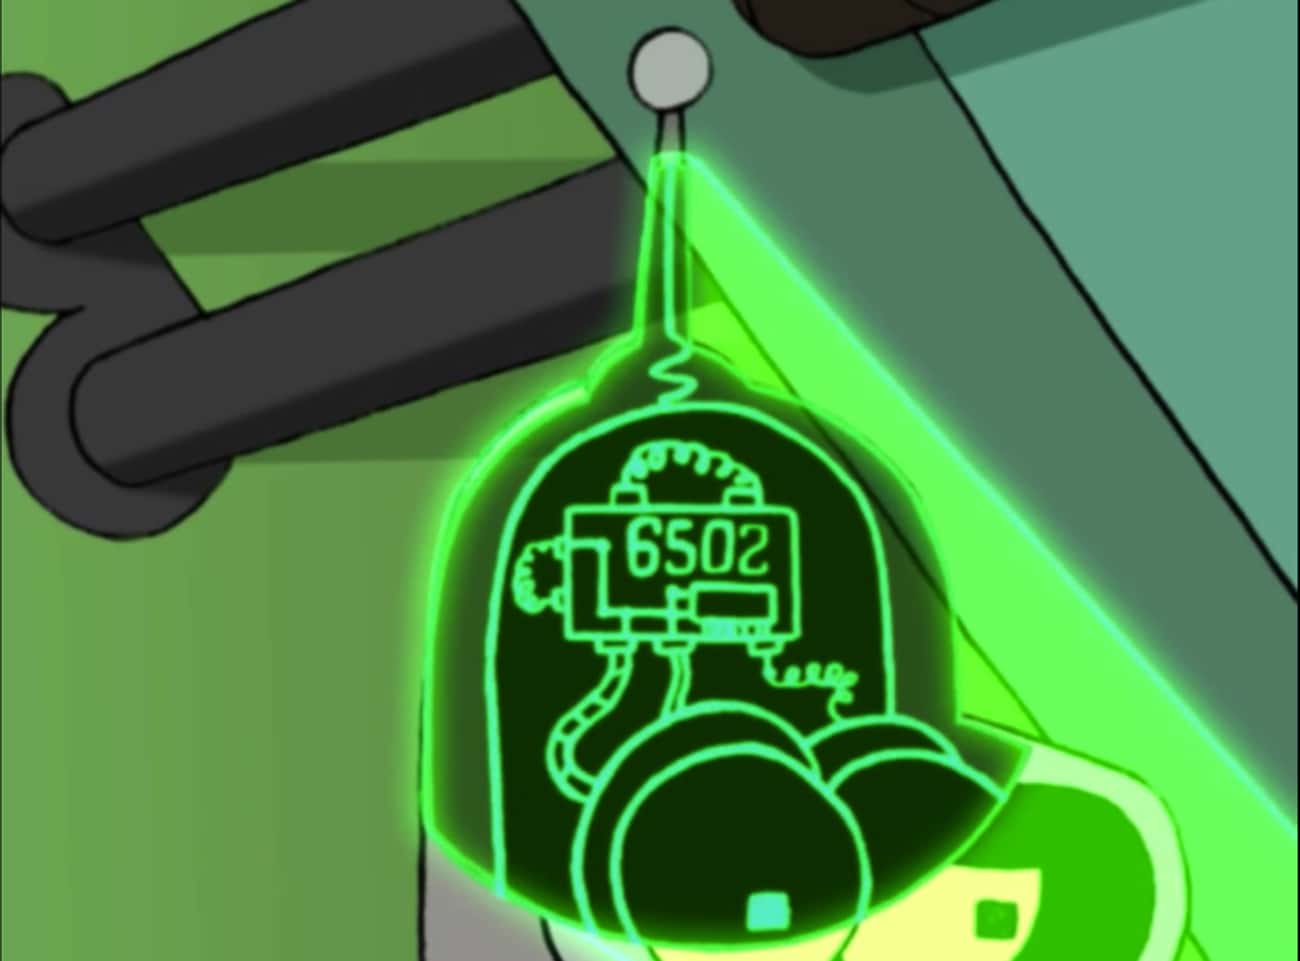 Part 6502, As Seen Inside Bender's Head, Was Real And Made By Motorola